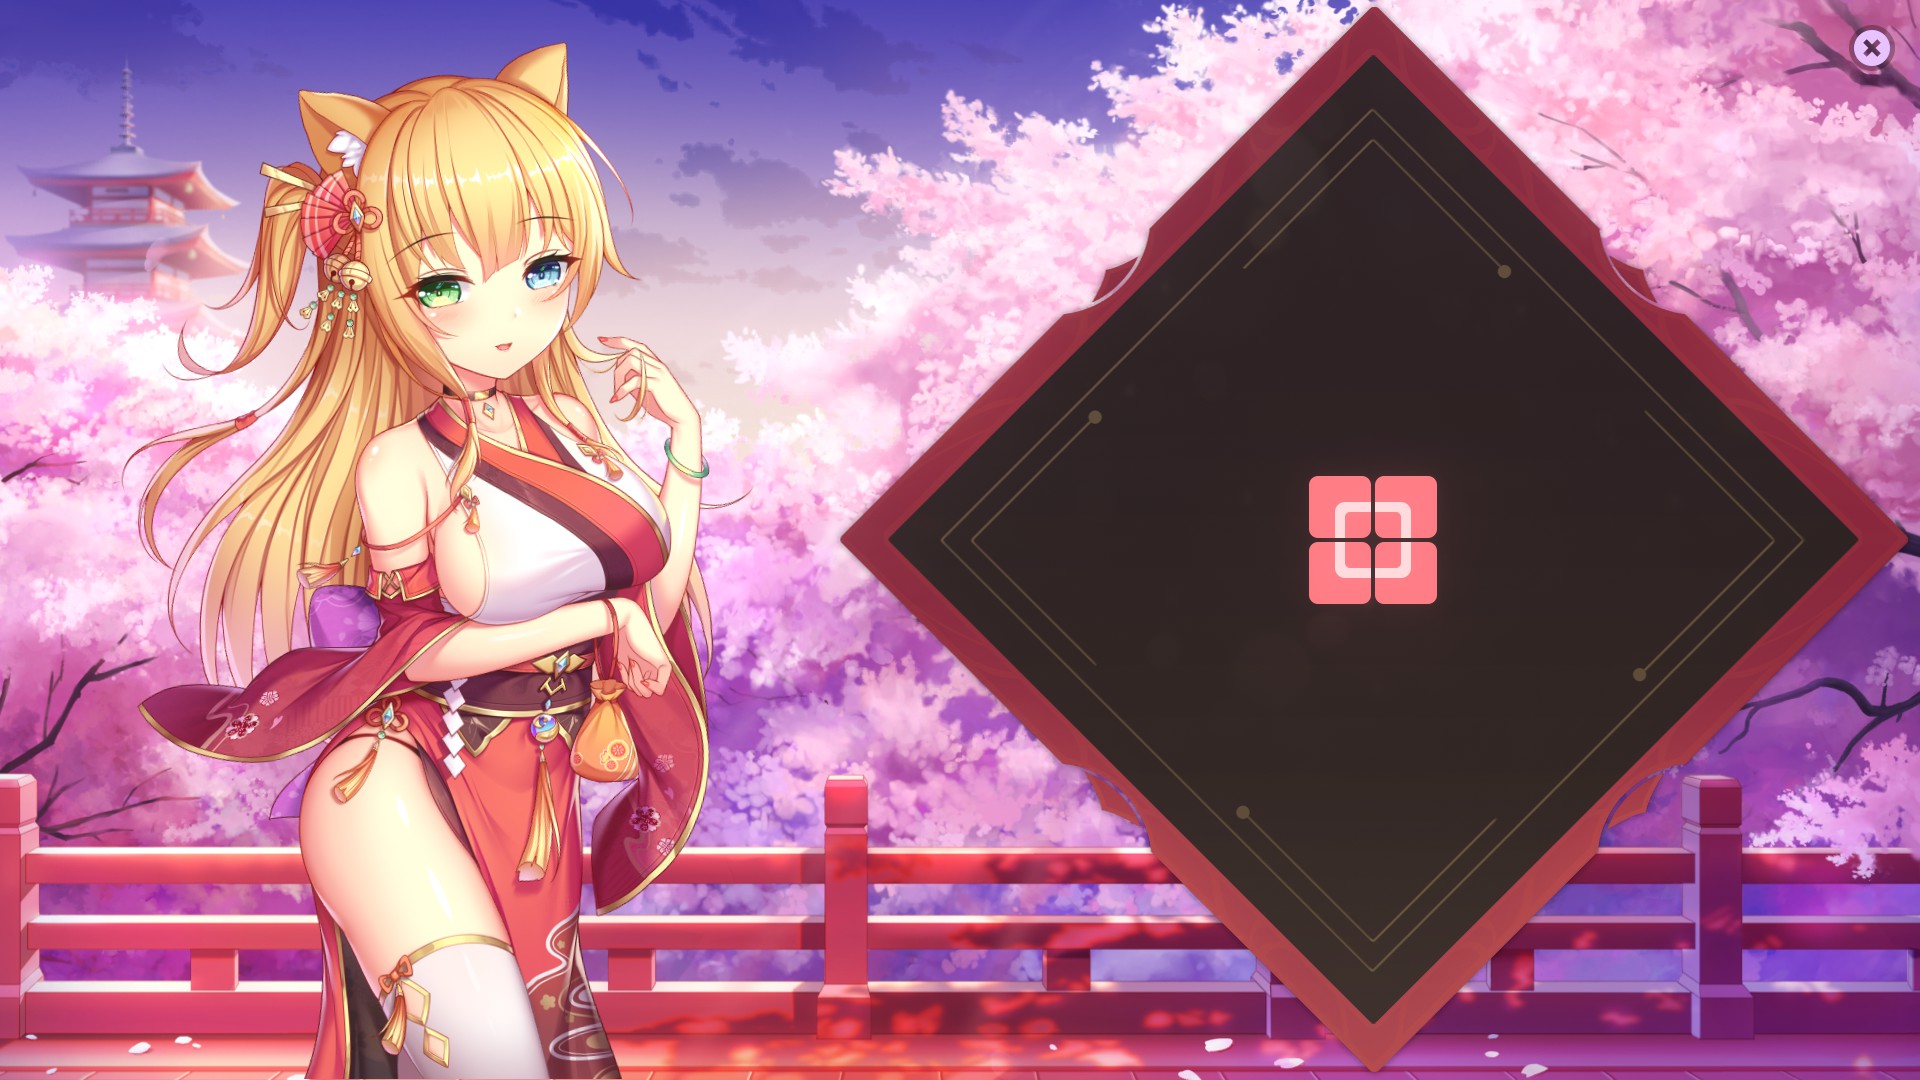 Sakura Hime 2 Achievement Guide - Images of completed levels - FD7056D